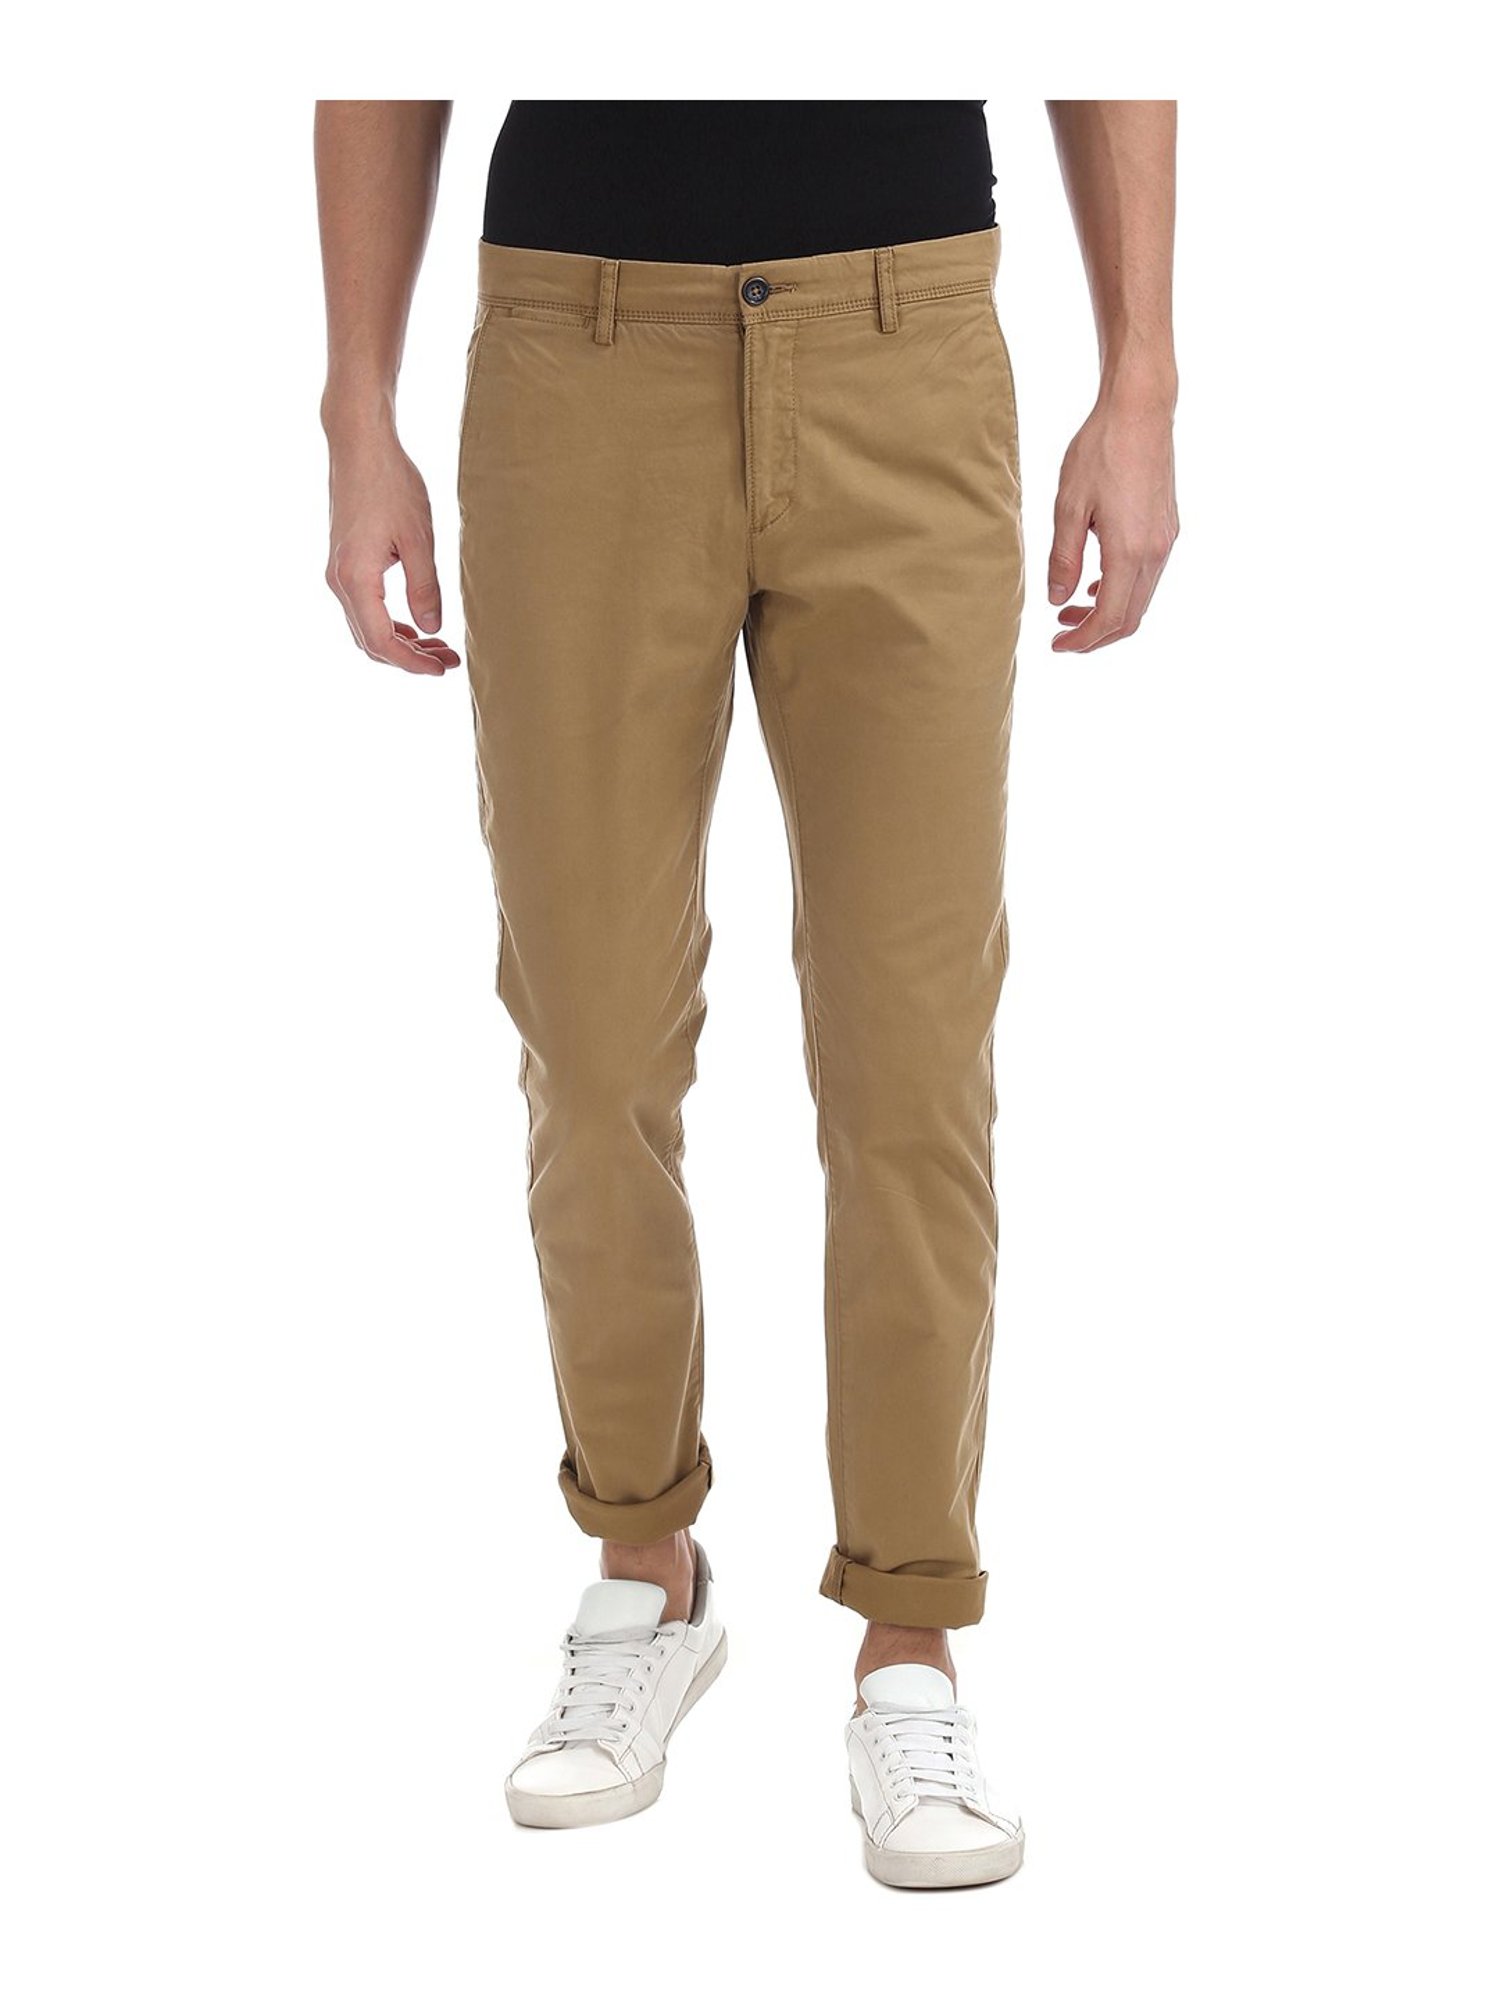 Designer Chino Pants For Men  Shop Chinos For Men Polo